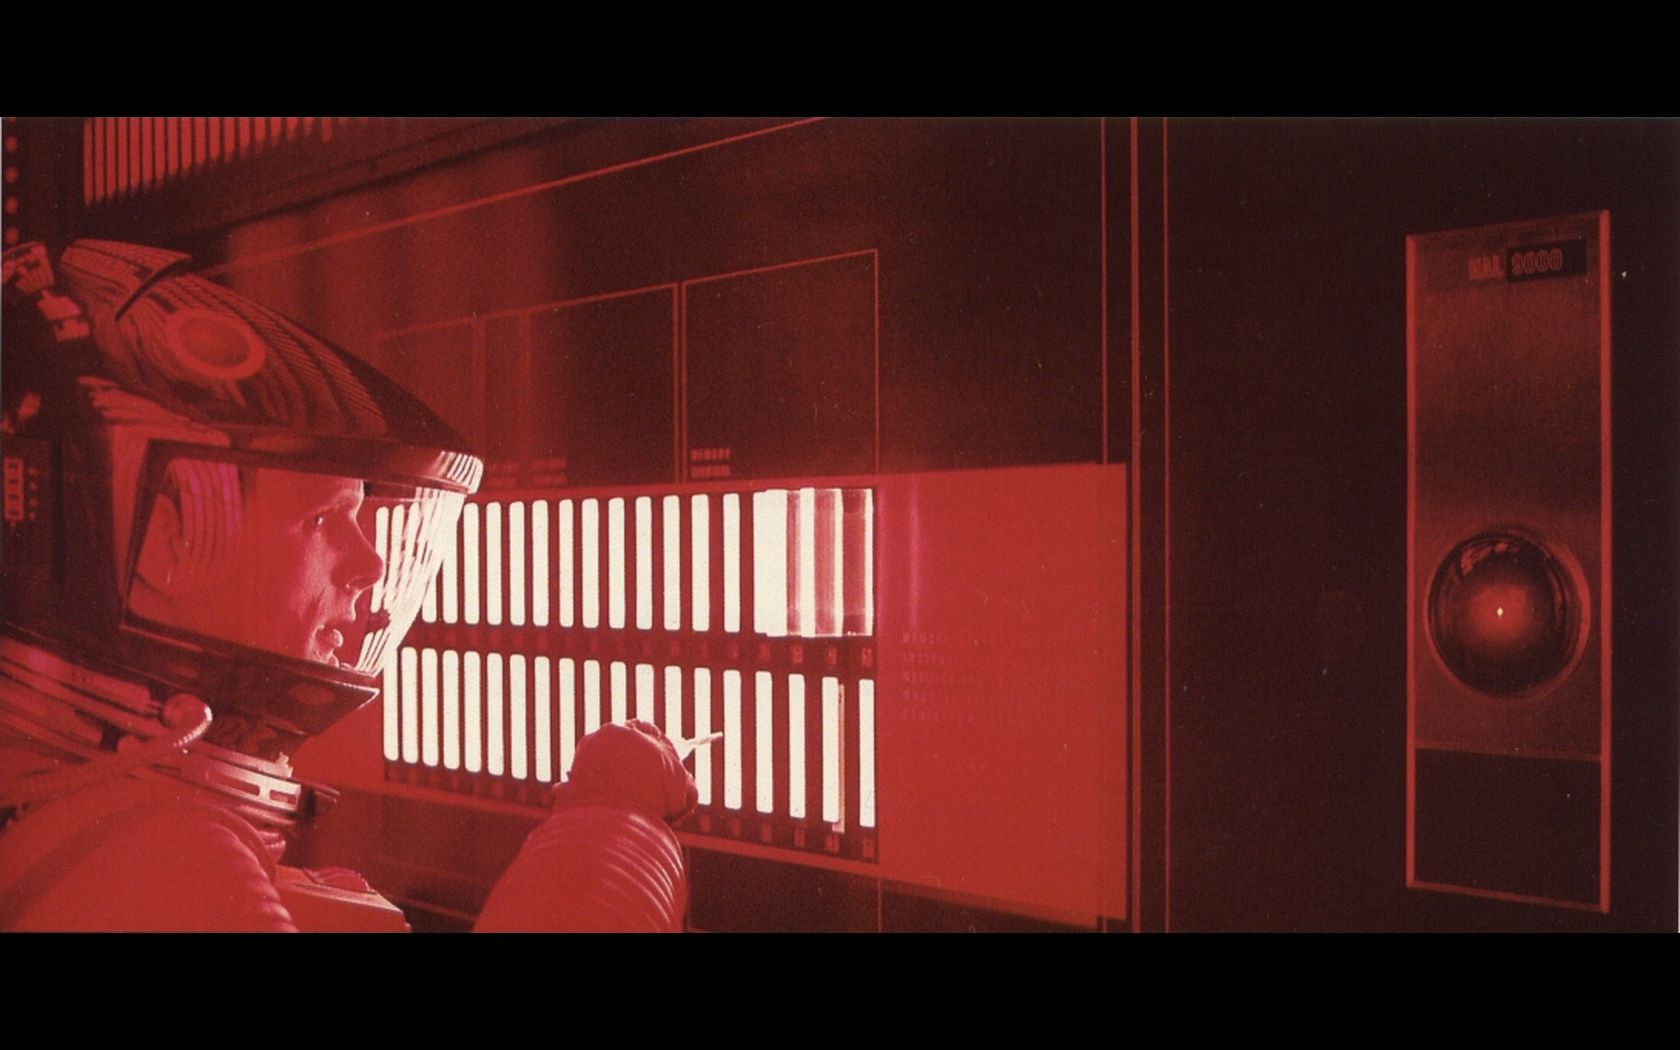 2001: A Space Odyssey: A Film of Music and Mysticism